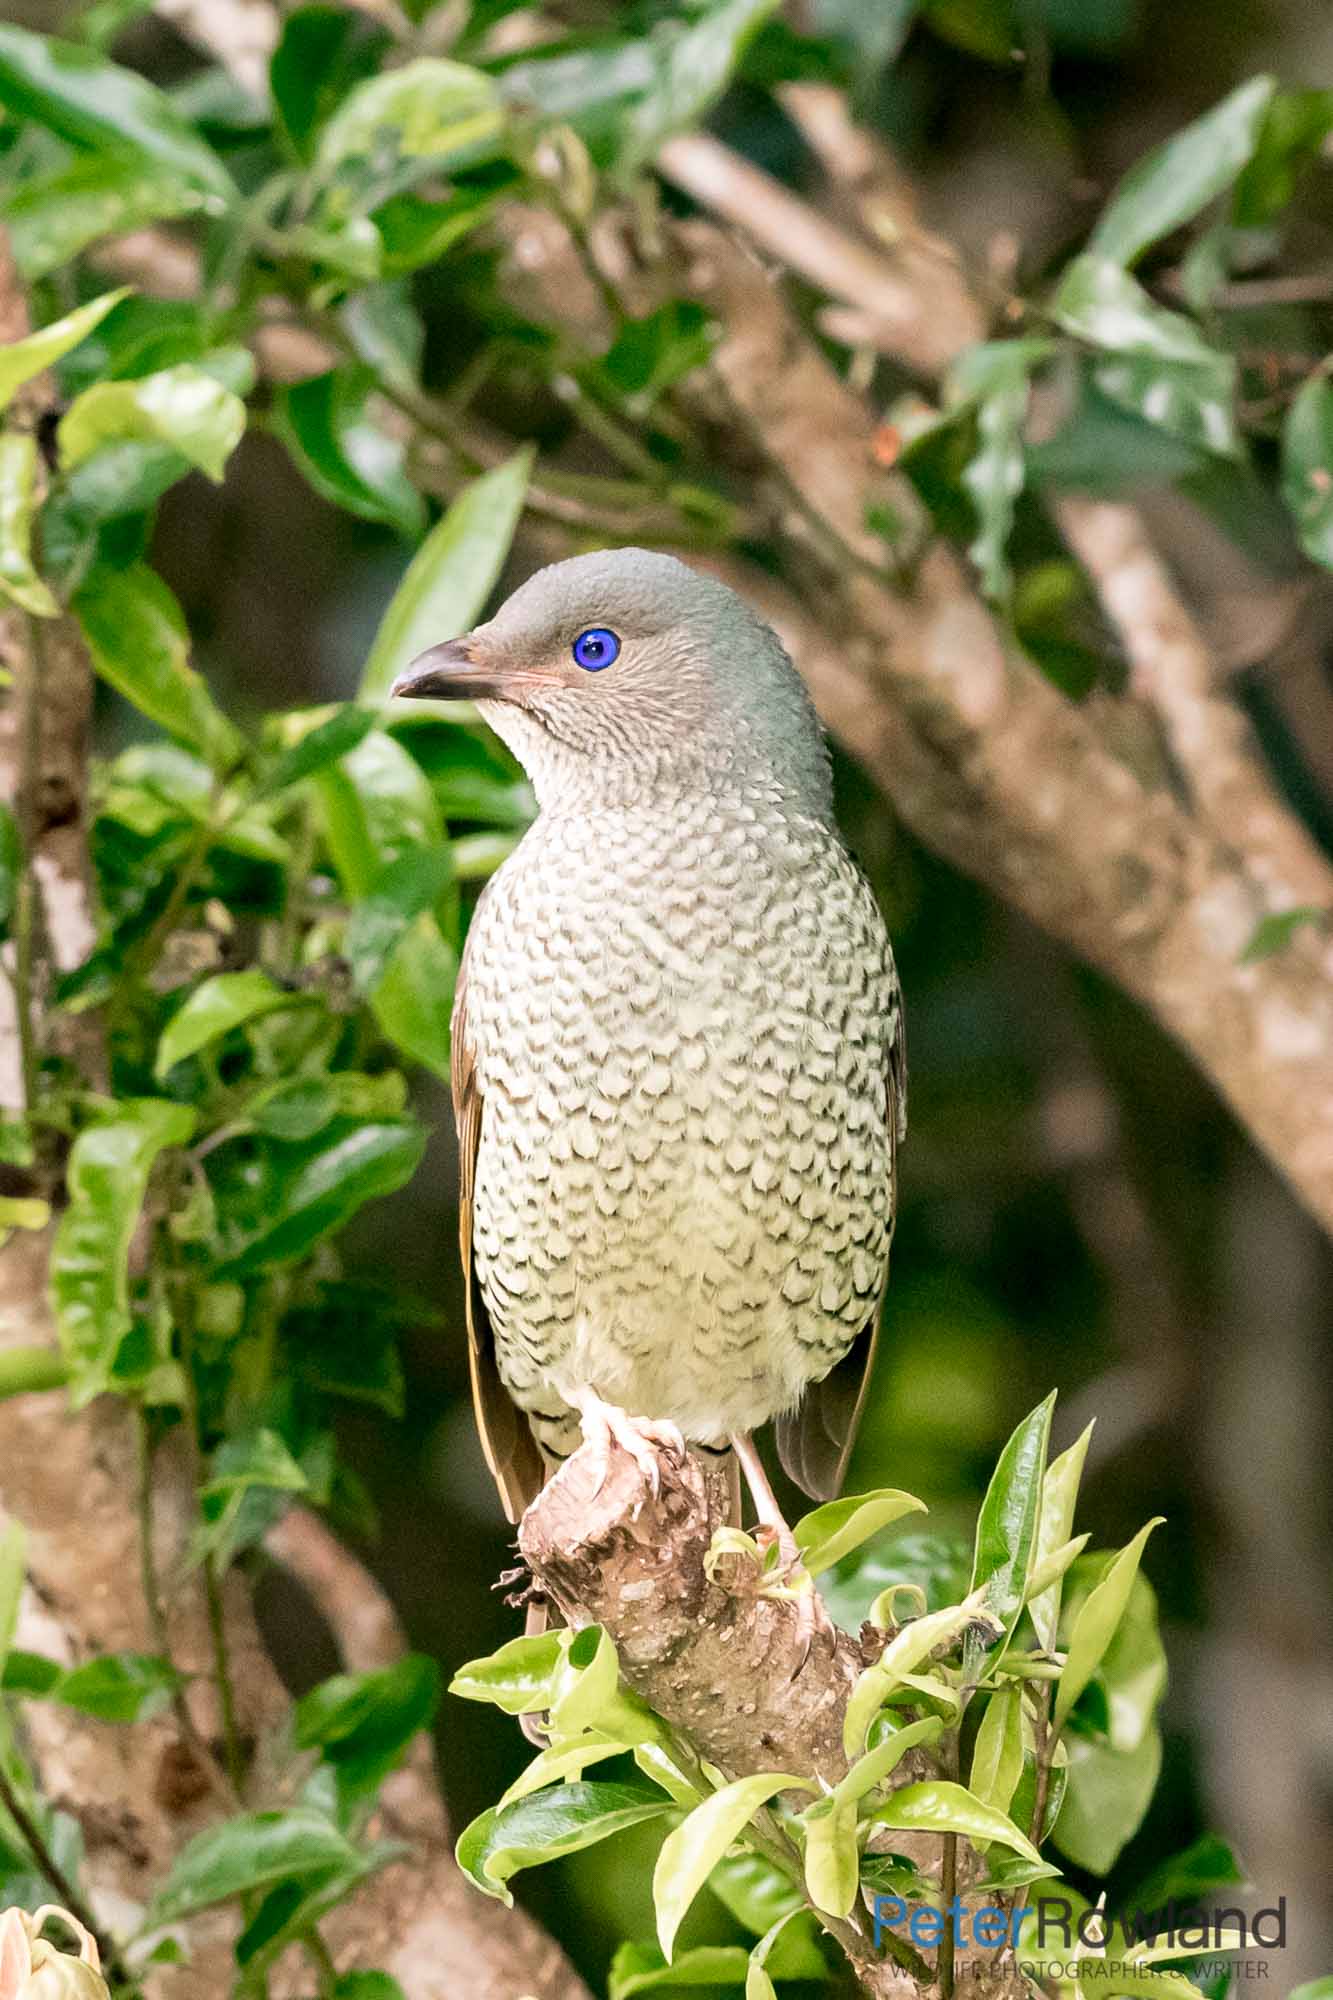 A female or imamature male Satin Bowerbird perched in a tree